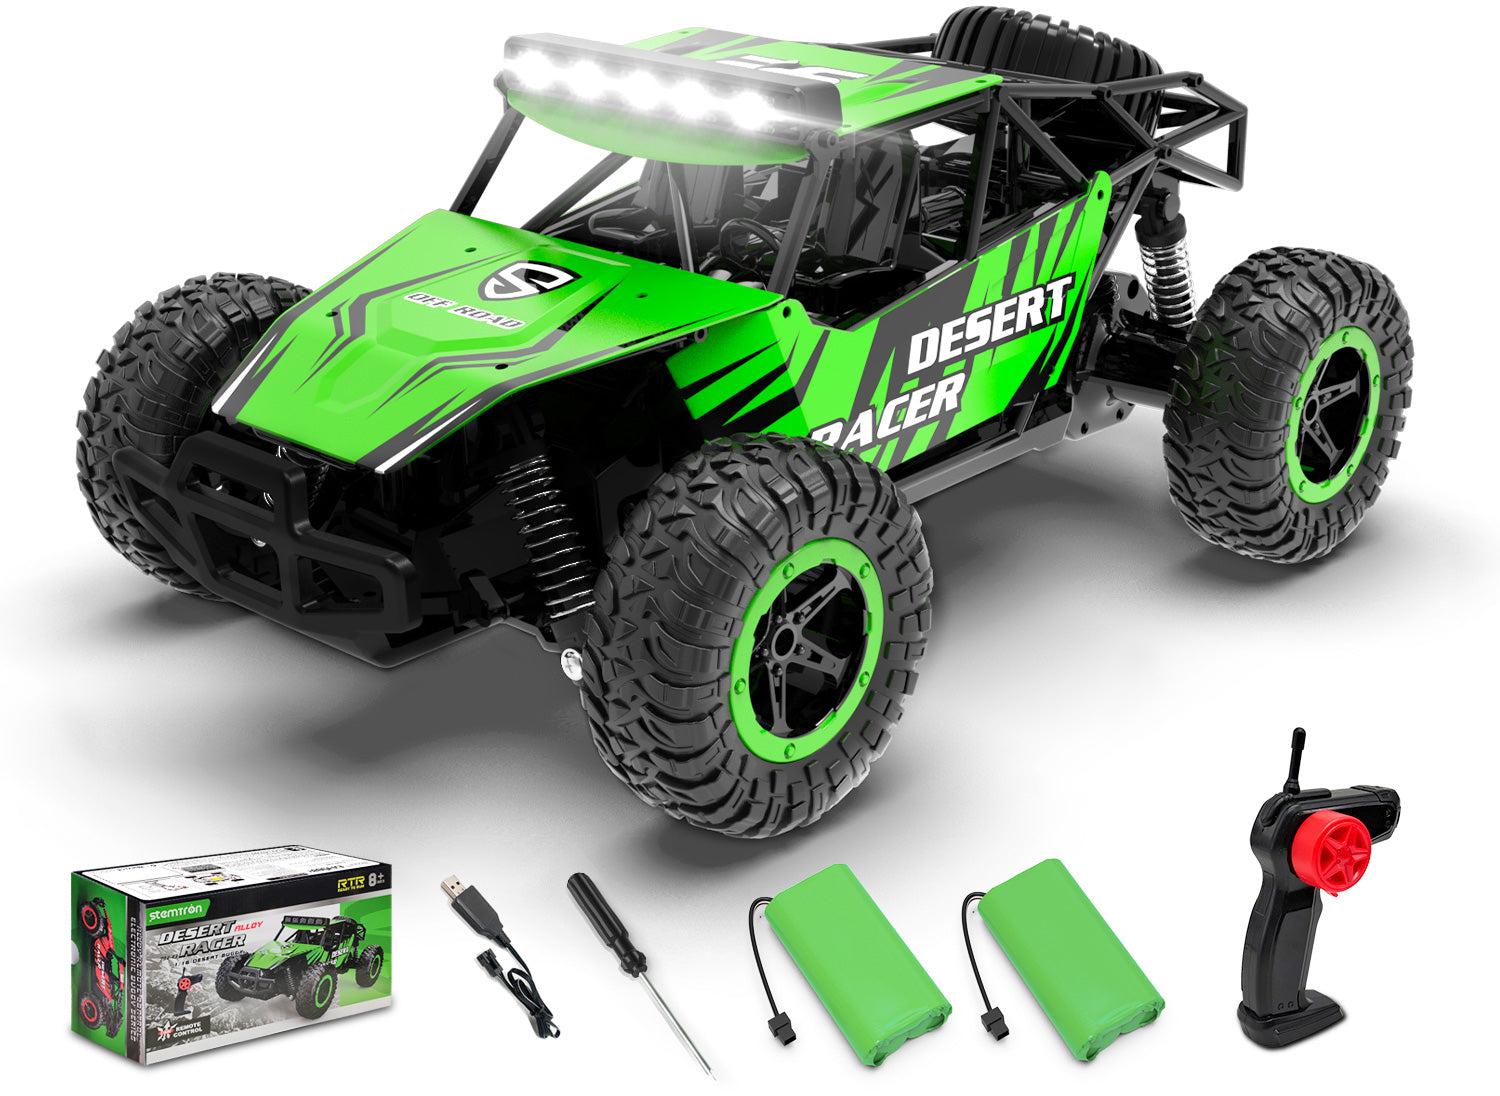 RACENT 1/16 All Terrain Remote Control Car for Kids Off Road RC Truck Desert Racer Great Gift